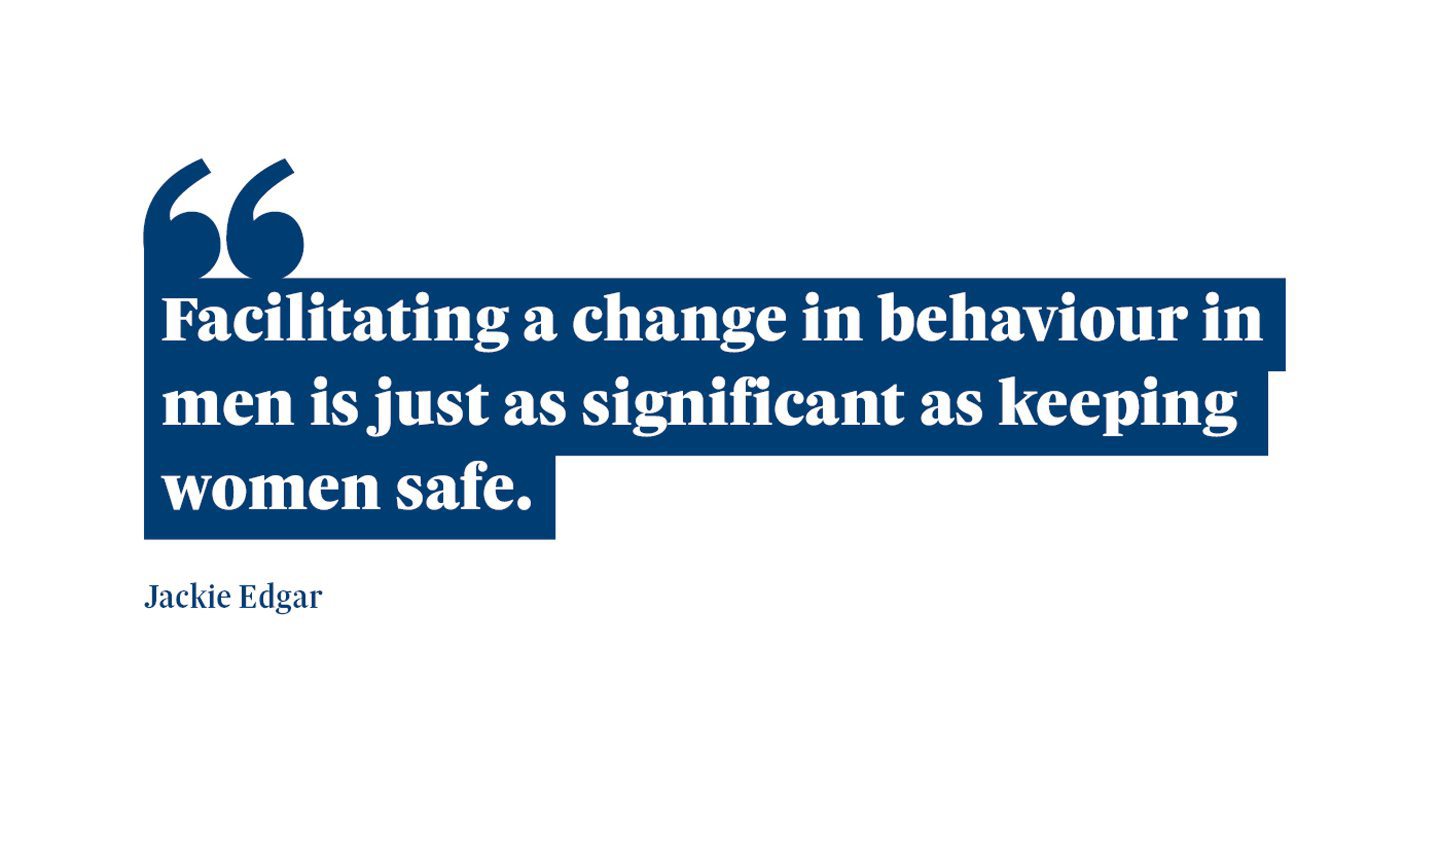 A quote from Jackie Edgar which says: “Facilitating a change in behaviour in men is just as significant as keeping women safe."